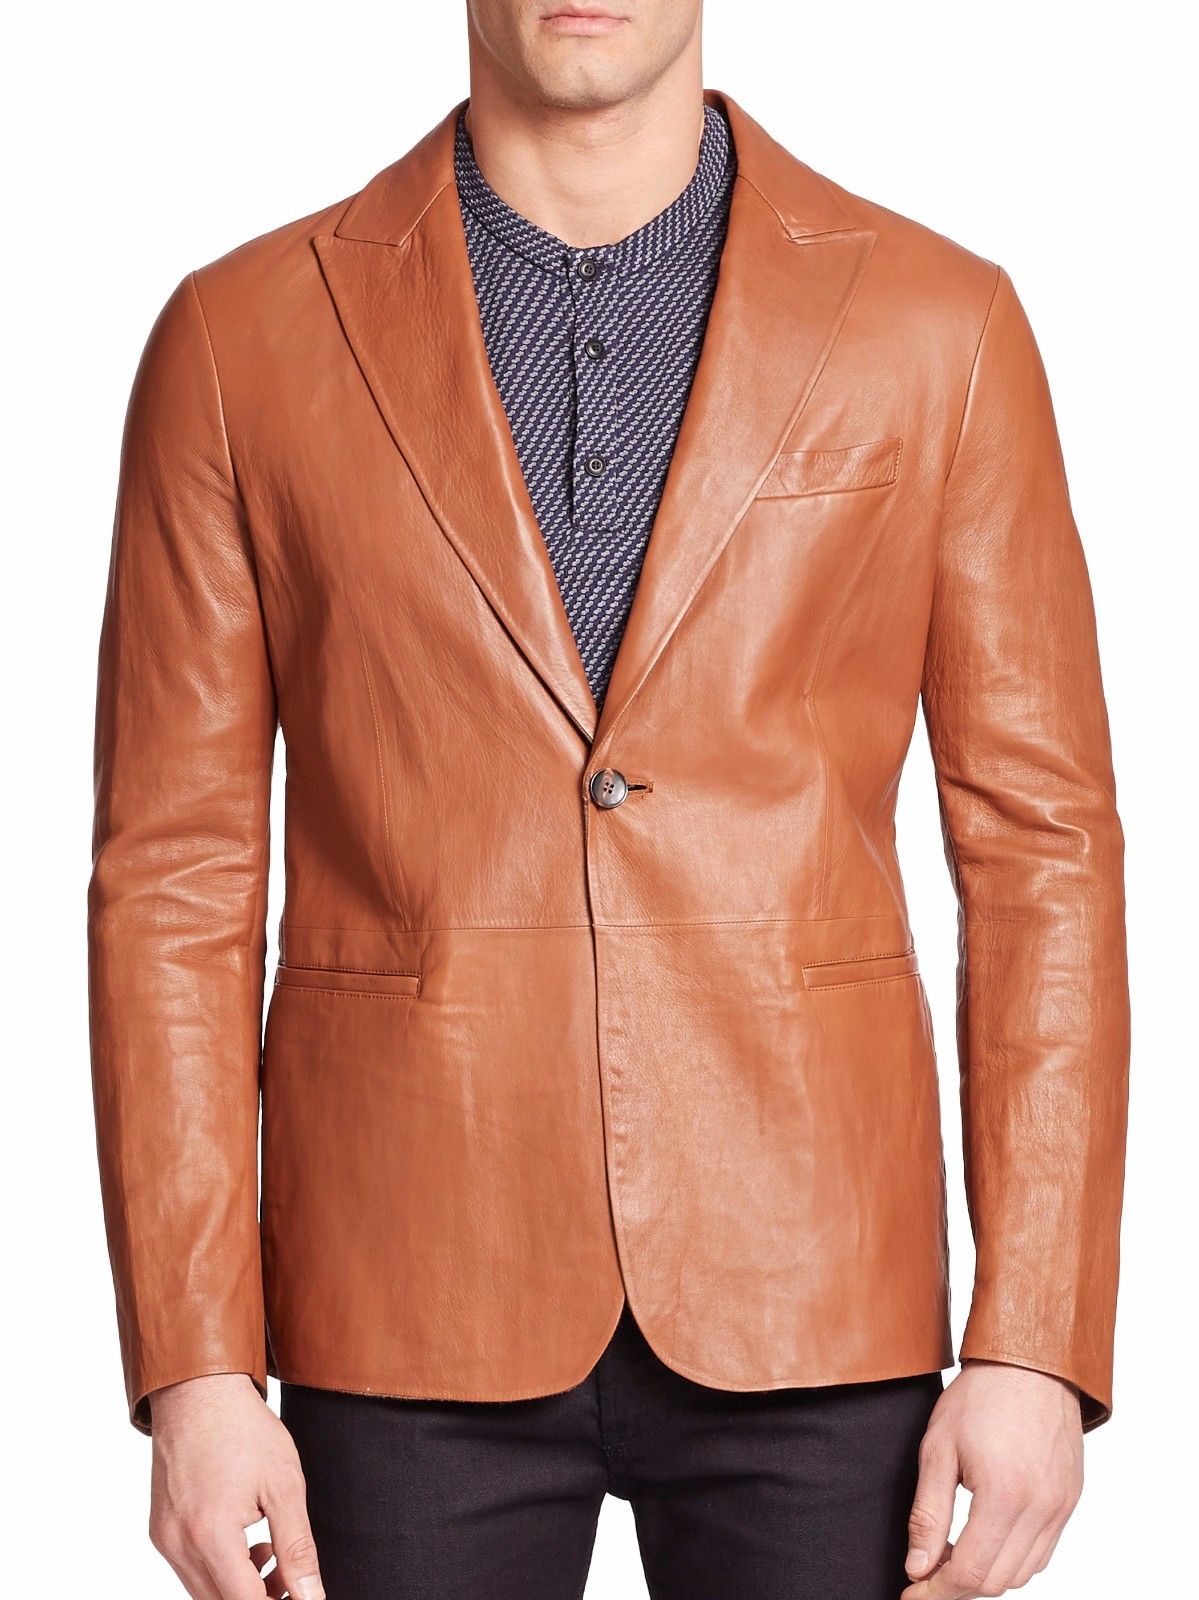 custom-tailor-made-all-size-leather-jacket-blazer